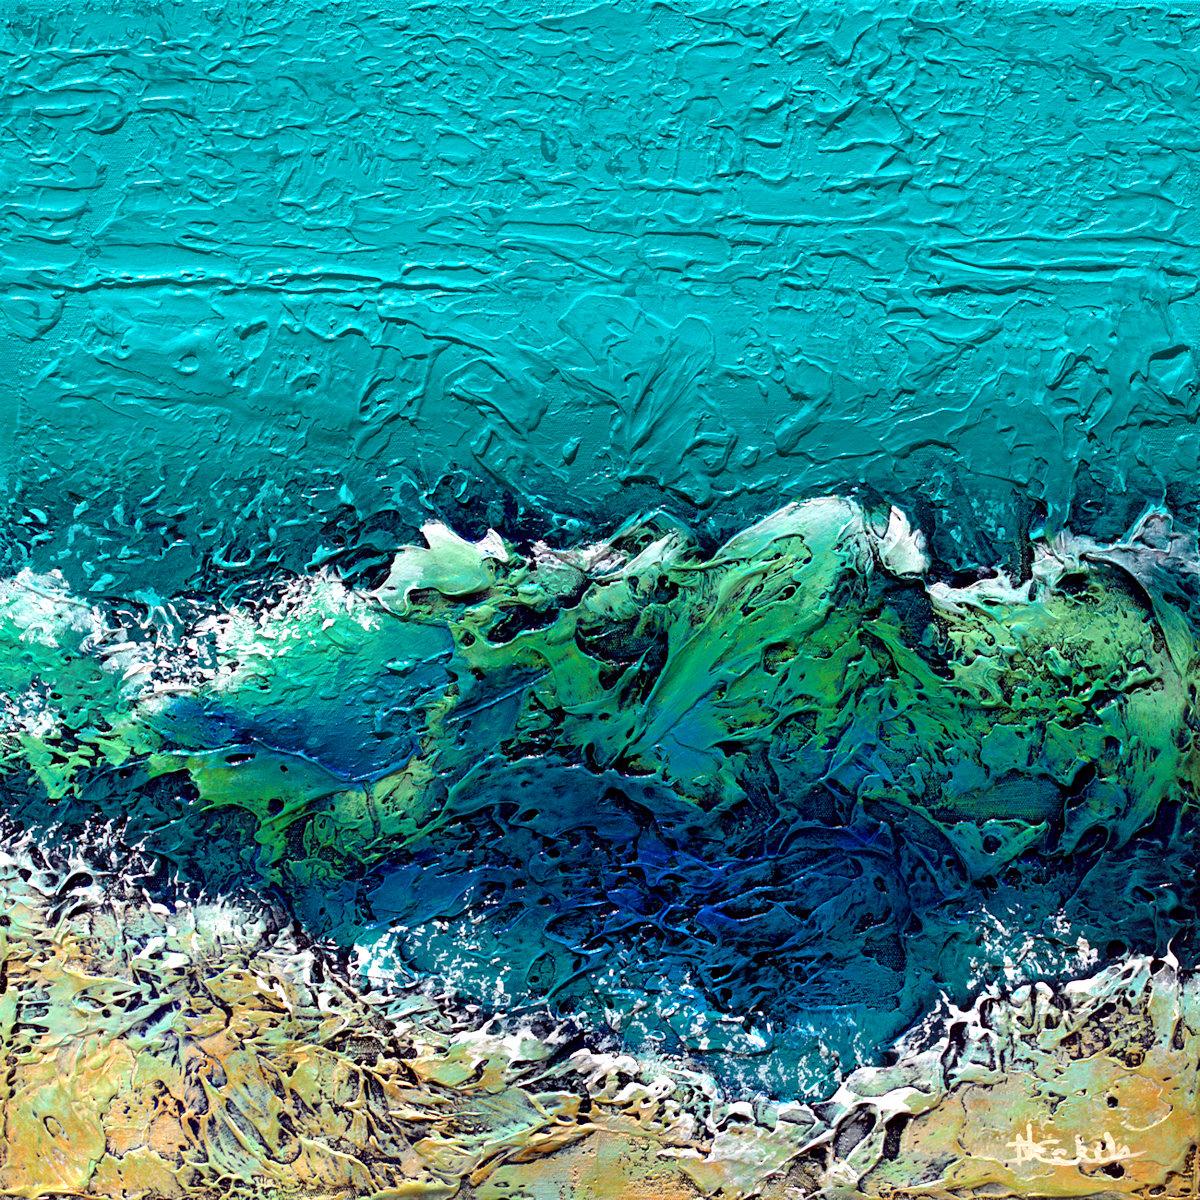 "Deep World" Contemporary abstract painting with texture, greens, blues - Mixed Media Art by Nancy Eckels